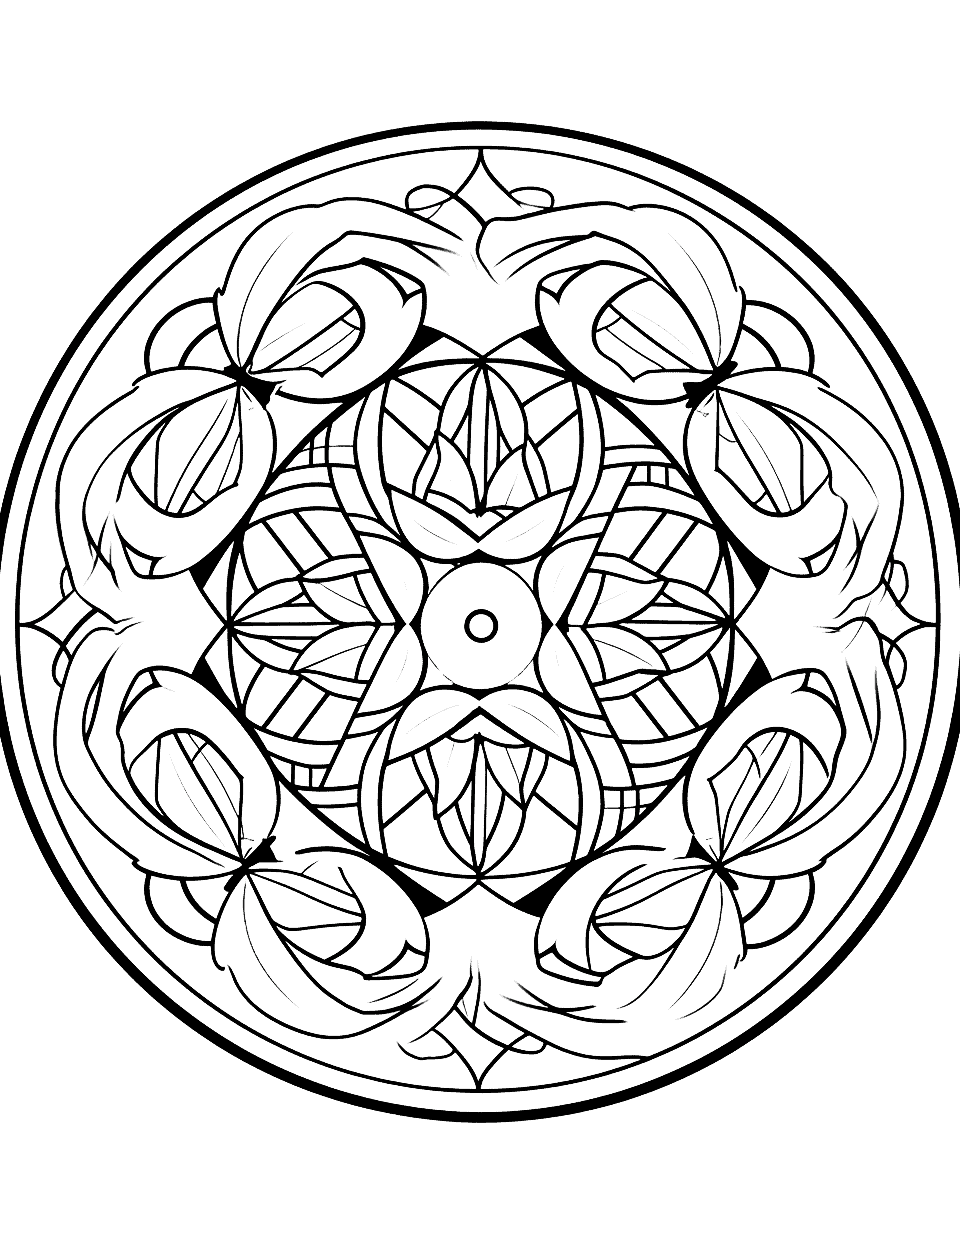 Paradise Parrots Mandala Coloring Page - A vibrant mandala featuring parrots and tropical fruits, great for practicing color blending.